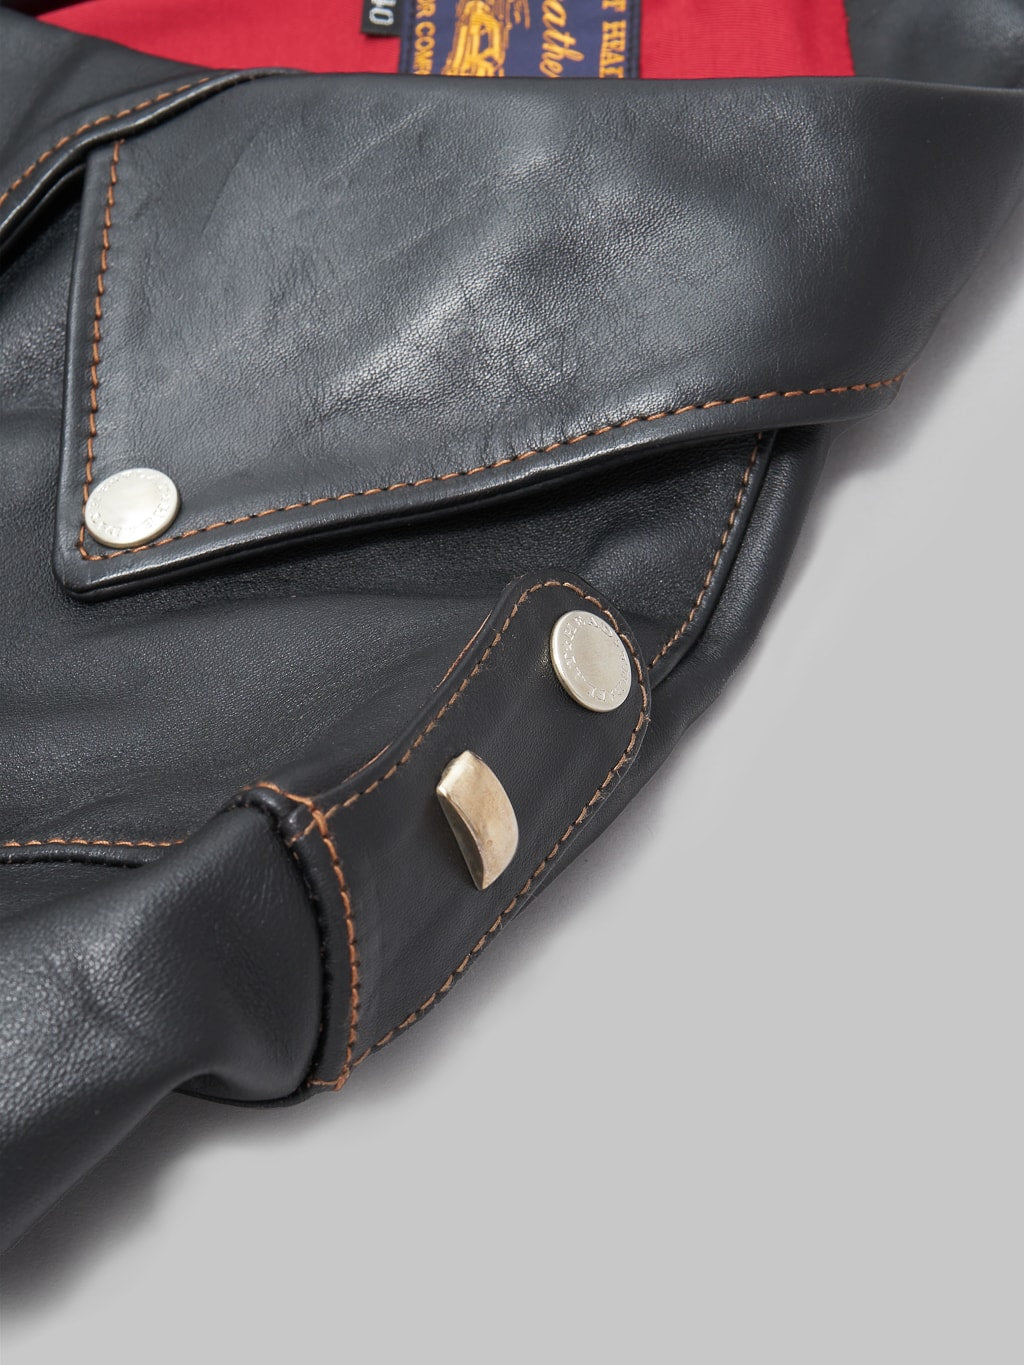 The Flat Head Horsehide Double Riders Jacket Black silver studs